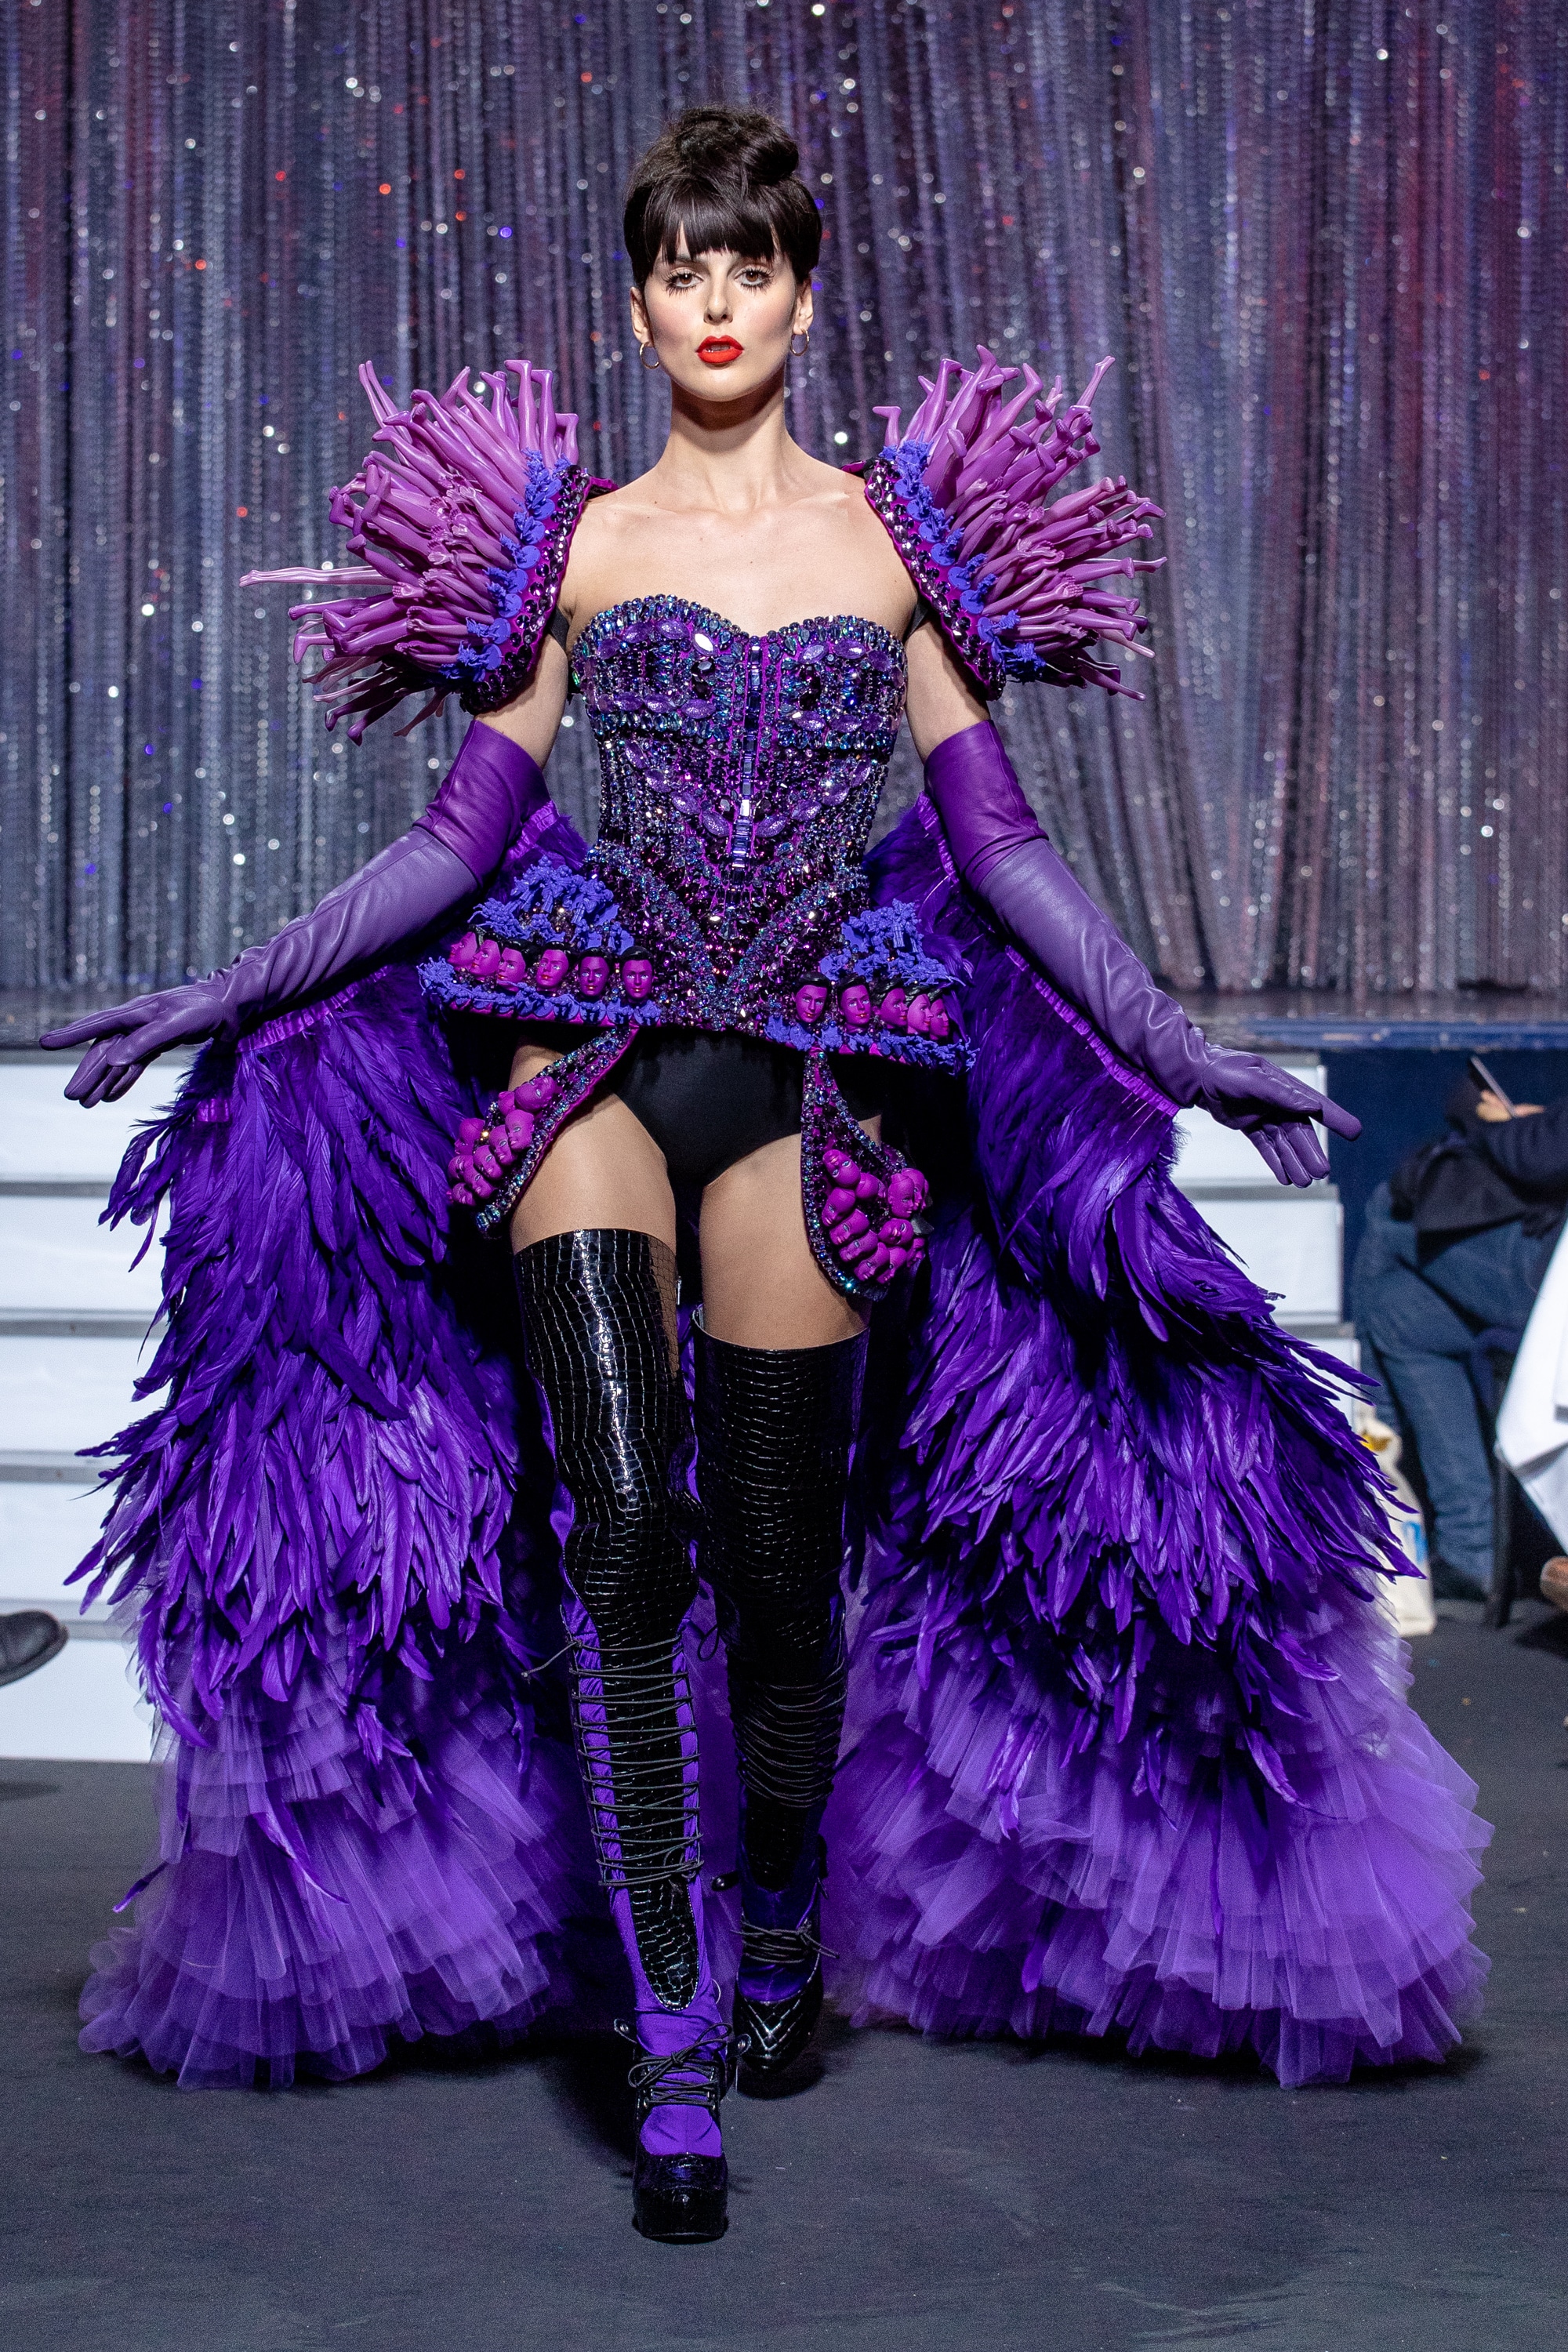 a model wearing  purpple crystal corset  outfit  crystal  and feathers  by on aura tout vu haute couture spring summer 2020